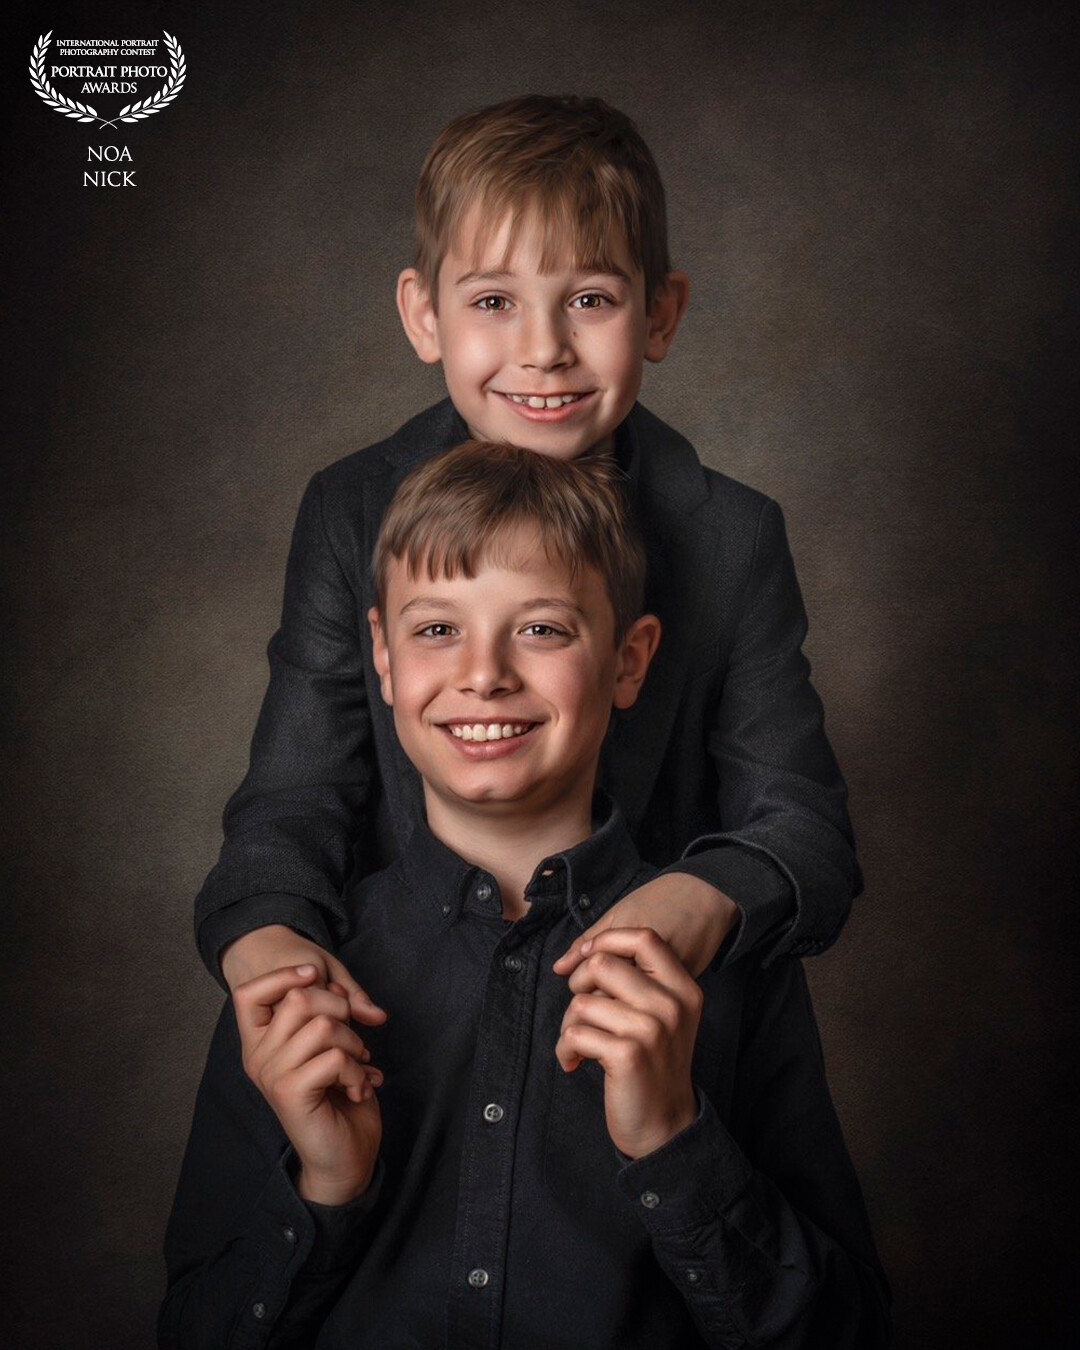 This image captures a heartwarming moment between two boy siblings, with the younger brother lovingly embracing his older sibling from behind. Their faces are lit up with genuine smiles, reflecting a bond that goes beyond mere friendship. The younger boy's arms wrapped around his older brother convey a sense of trust, admiration, and deep connection. The background is intentionally subdued, directing focus to the subjects, and the composition and lighting highlight the innocence and pure joy of the moment. This photograph isn't just a portrayal of two brothers; it's a celebration of family, love, and the unspoken understanding that exists within this special relationship.